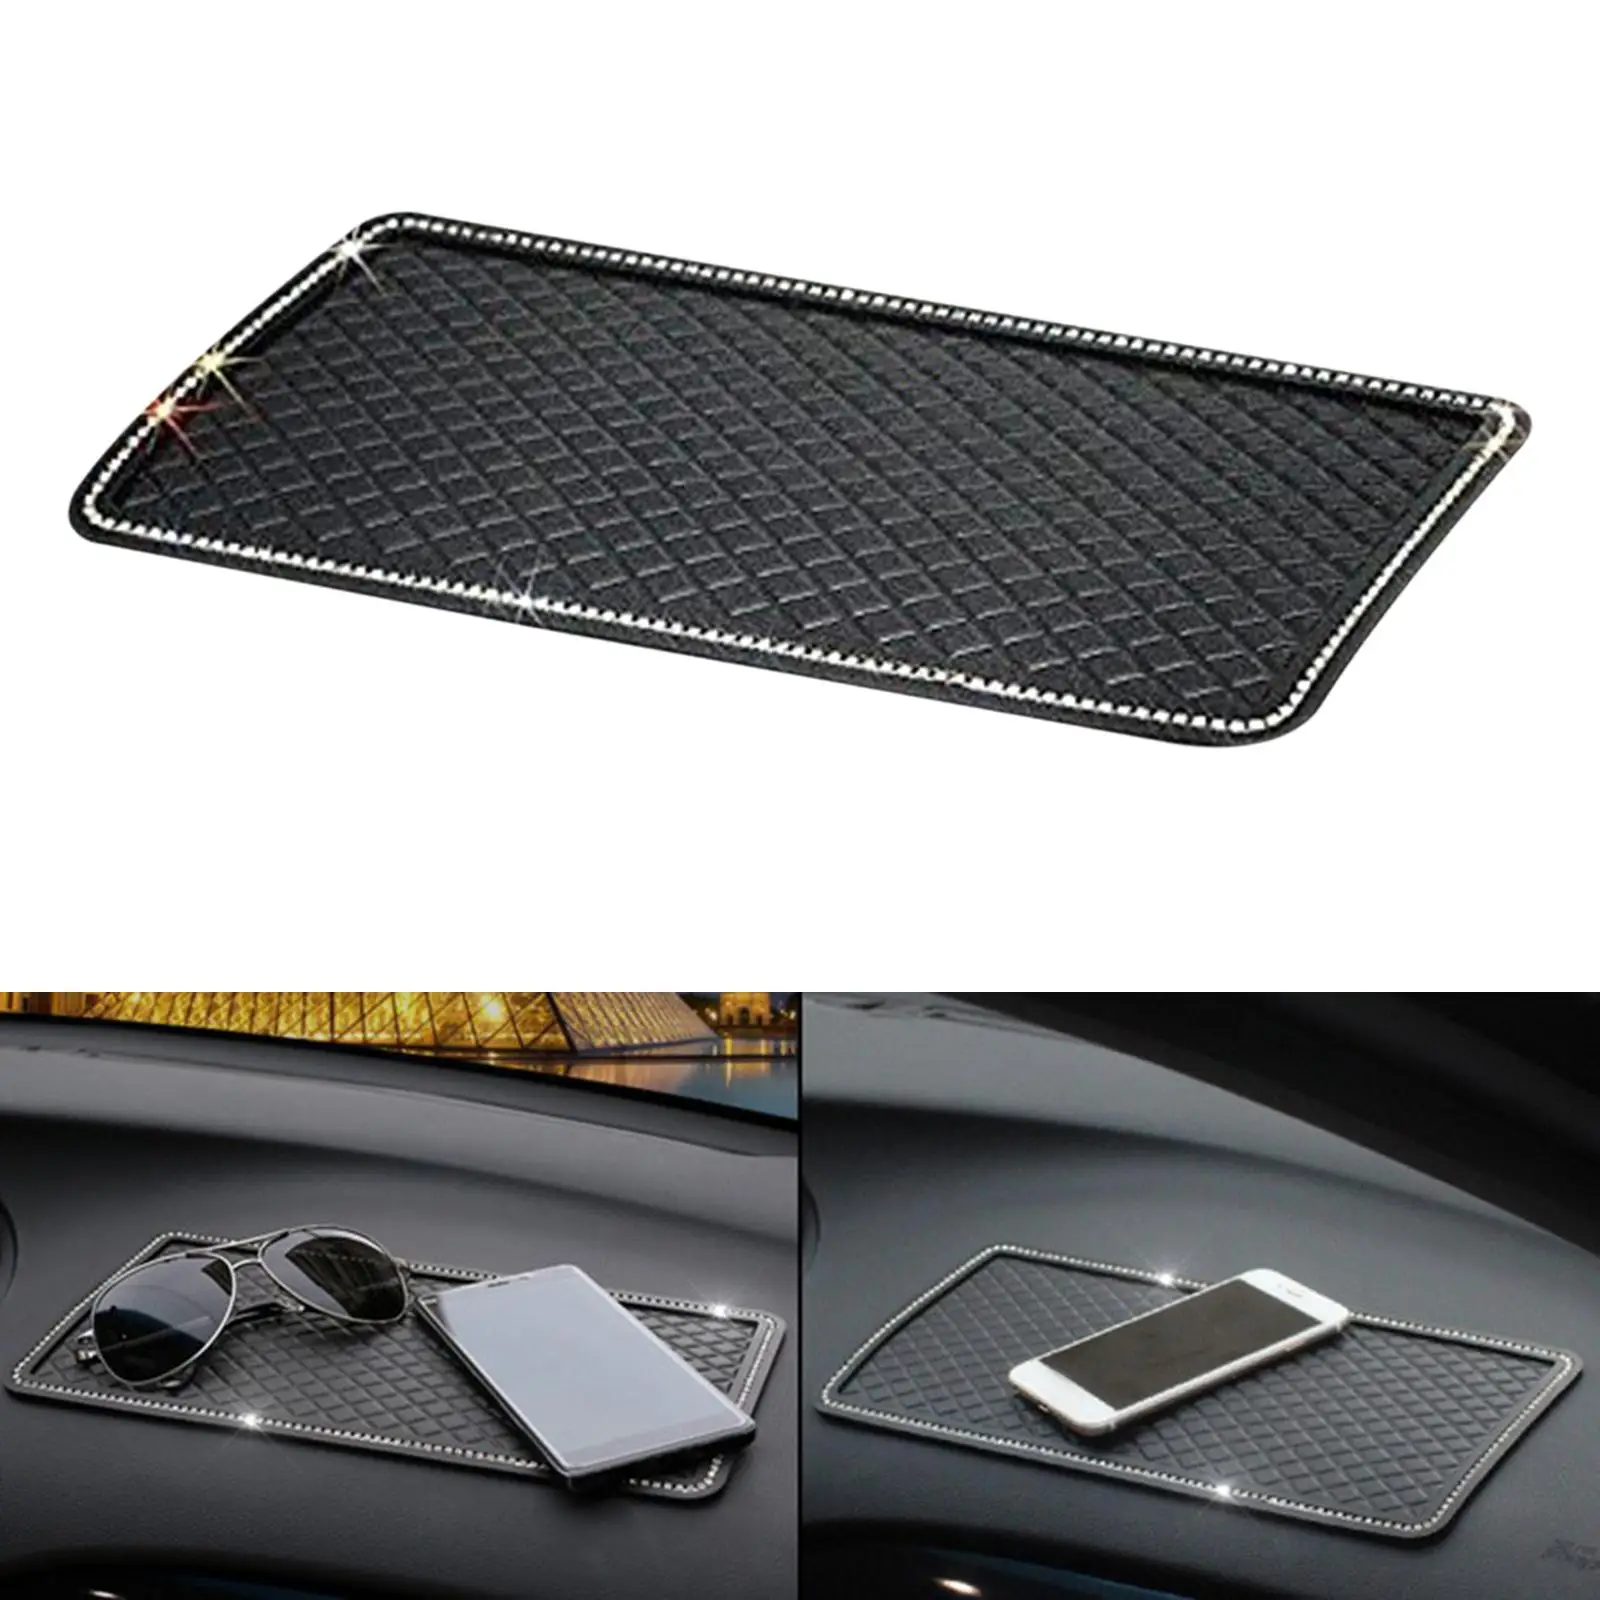 Universal Car Anti Slip Sticky Dashboard Pad Interior Accessories Removable Gripping Pad for Electronic Devices Phones Keys